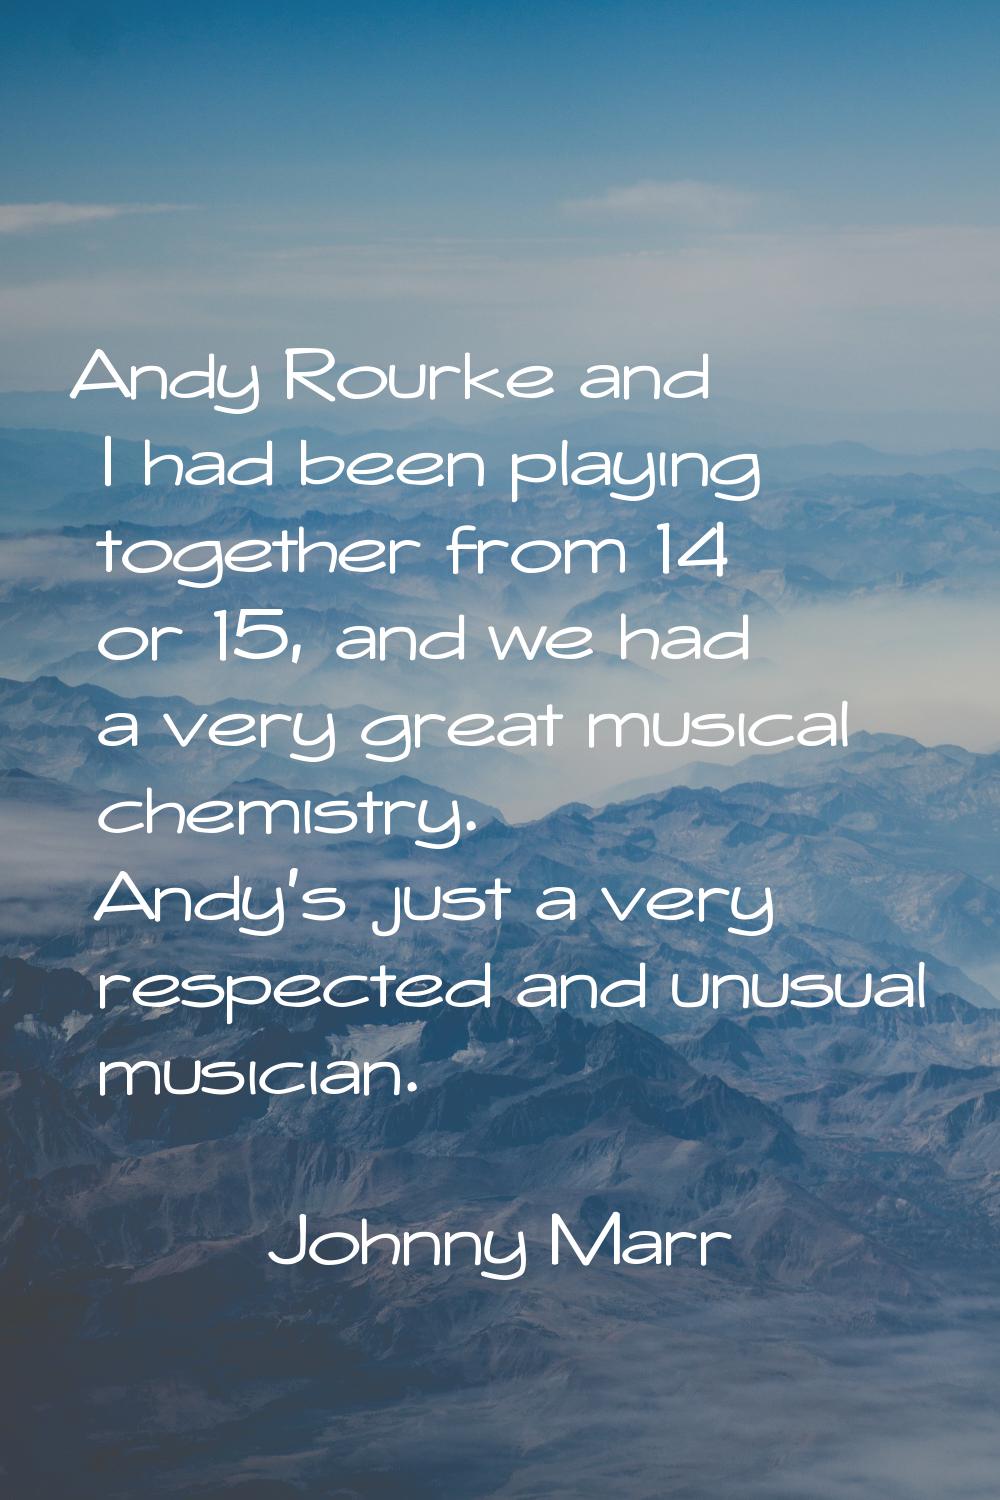 Andy Rourke and I had been playing together from 14 or 15, and we had a very great musical chemistr